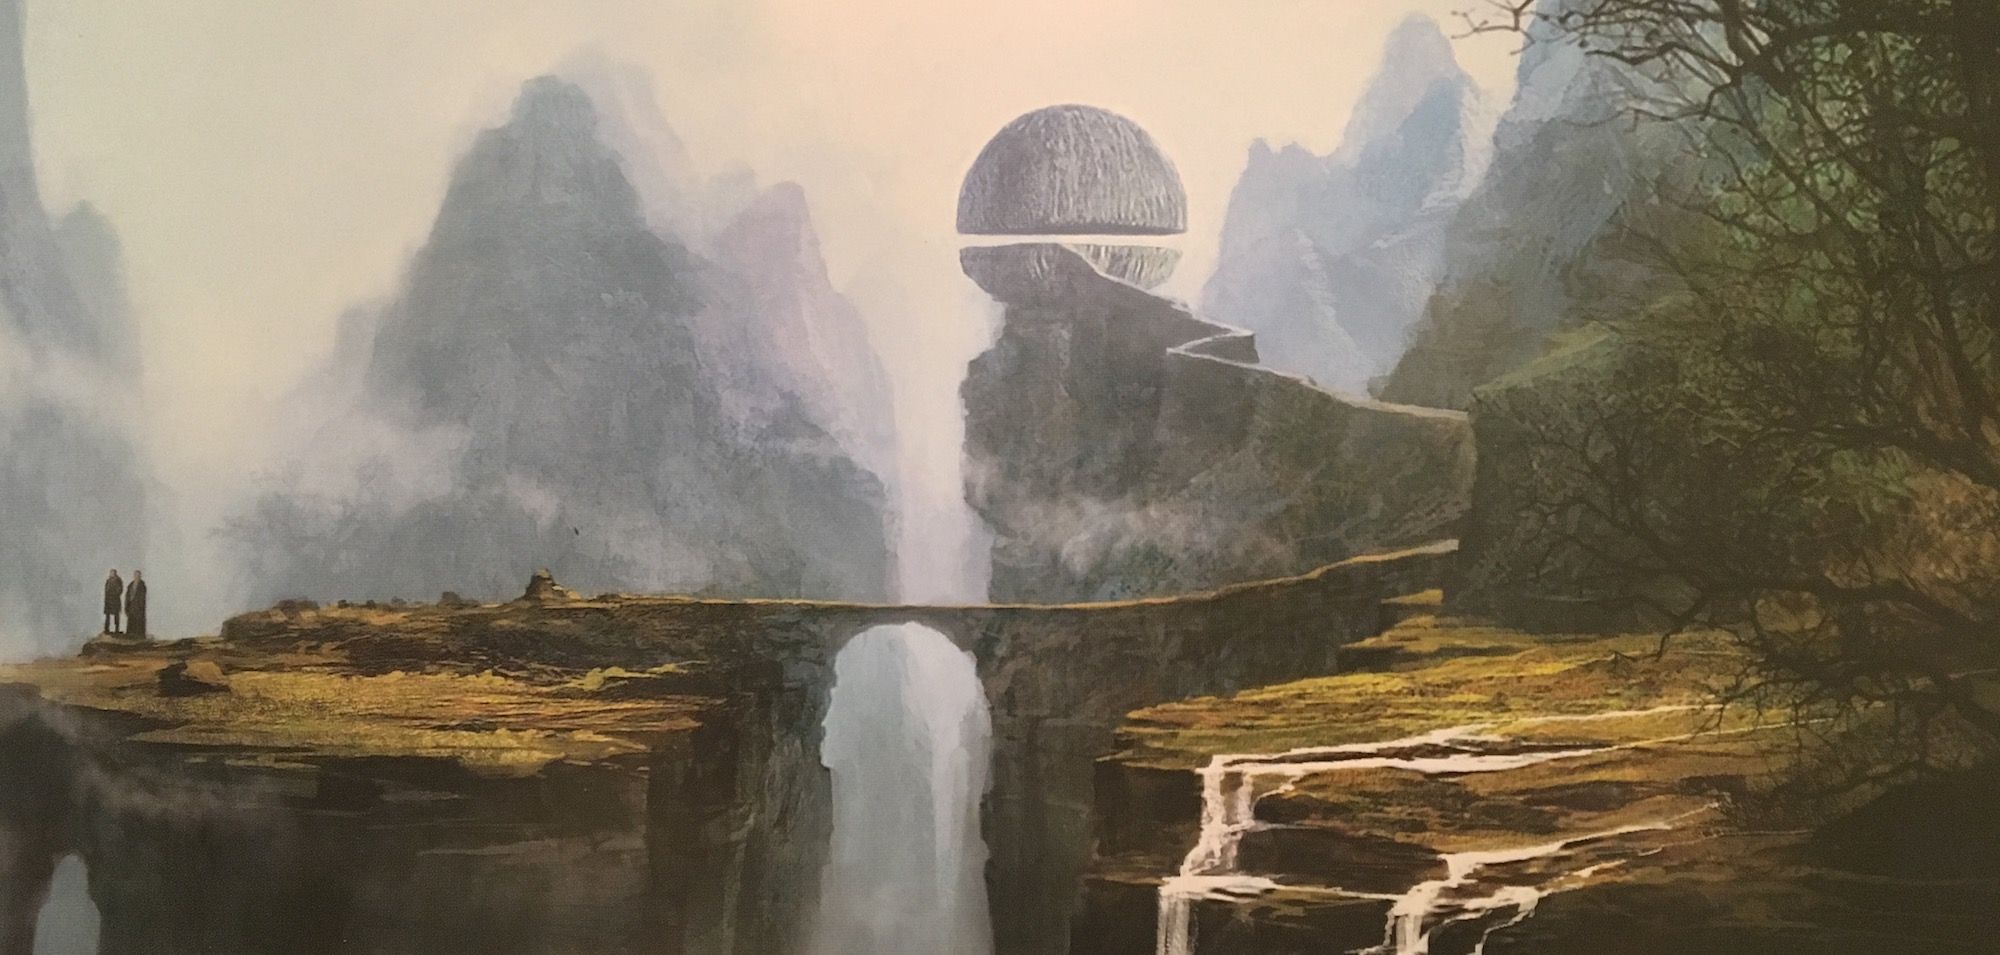 Floating rock domes in Star Wars The Last Jedi concept art